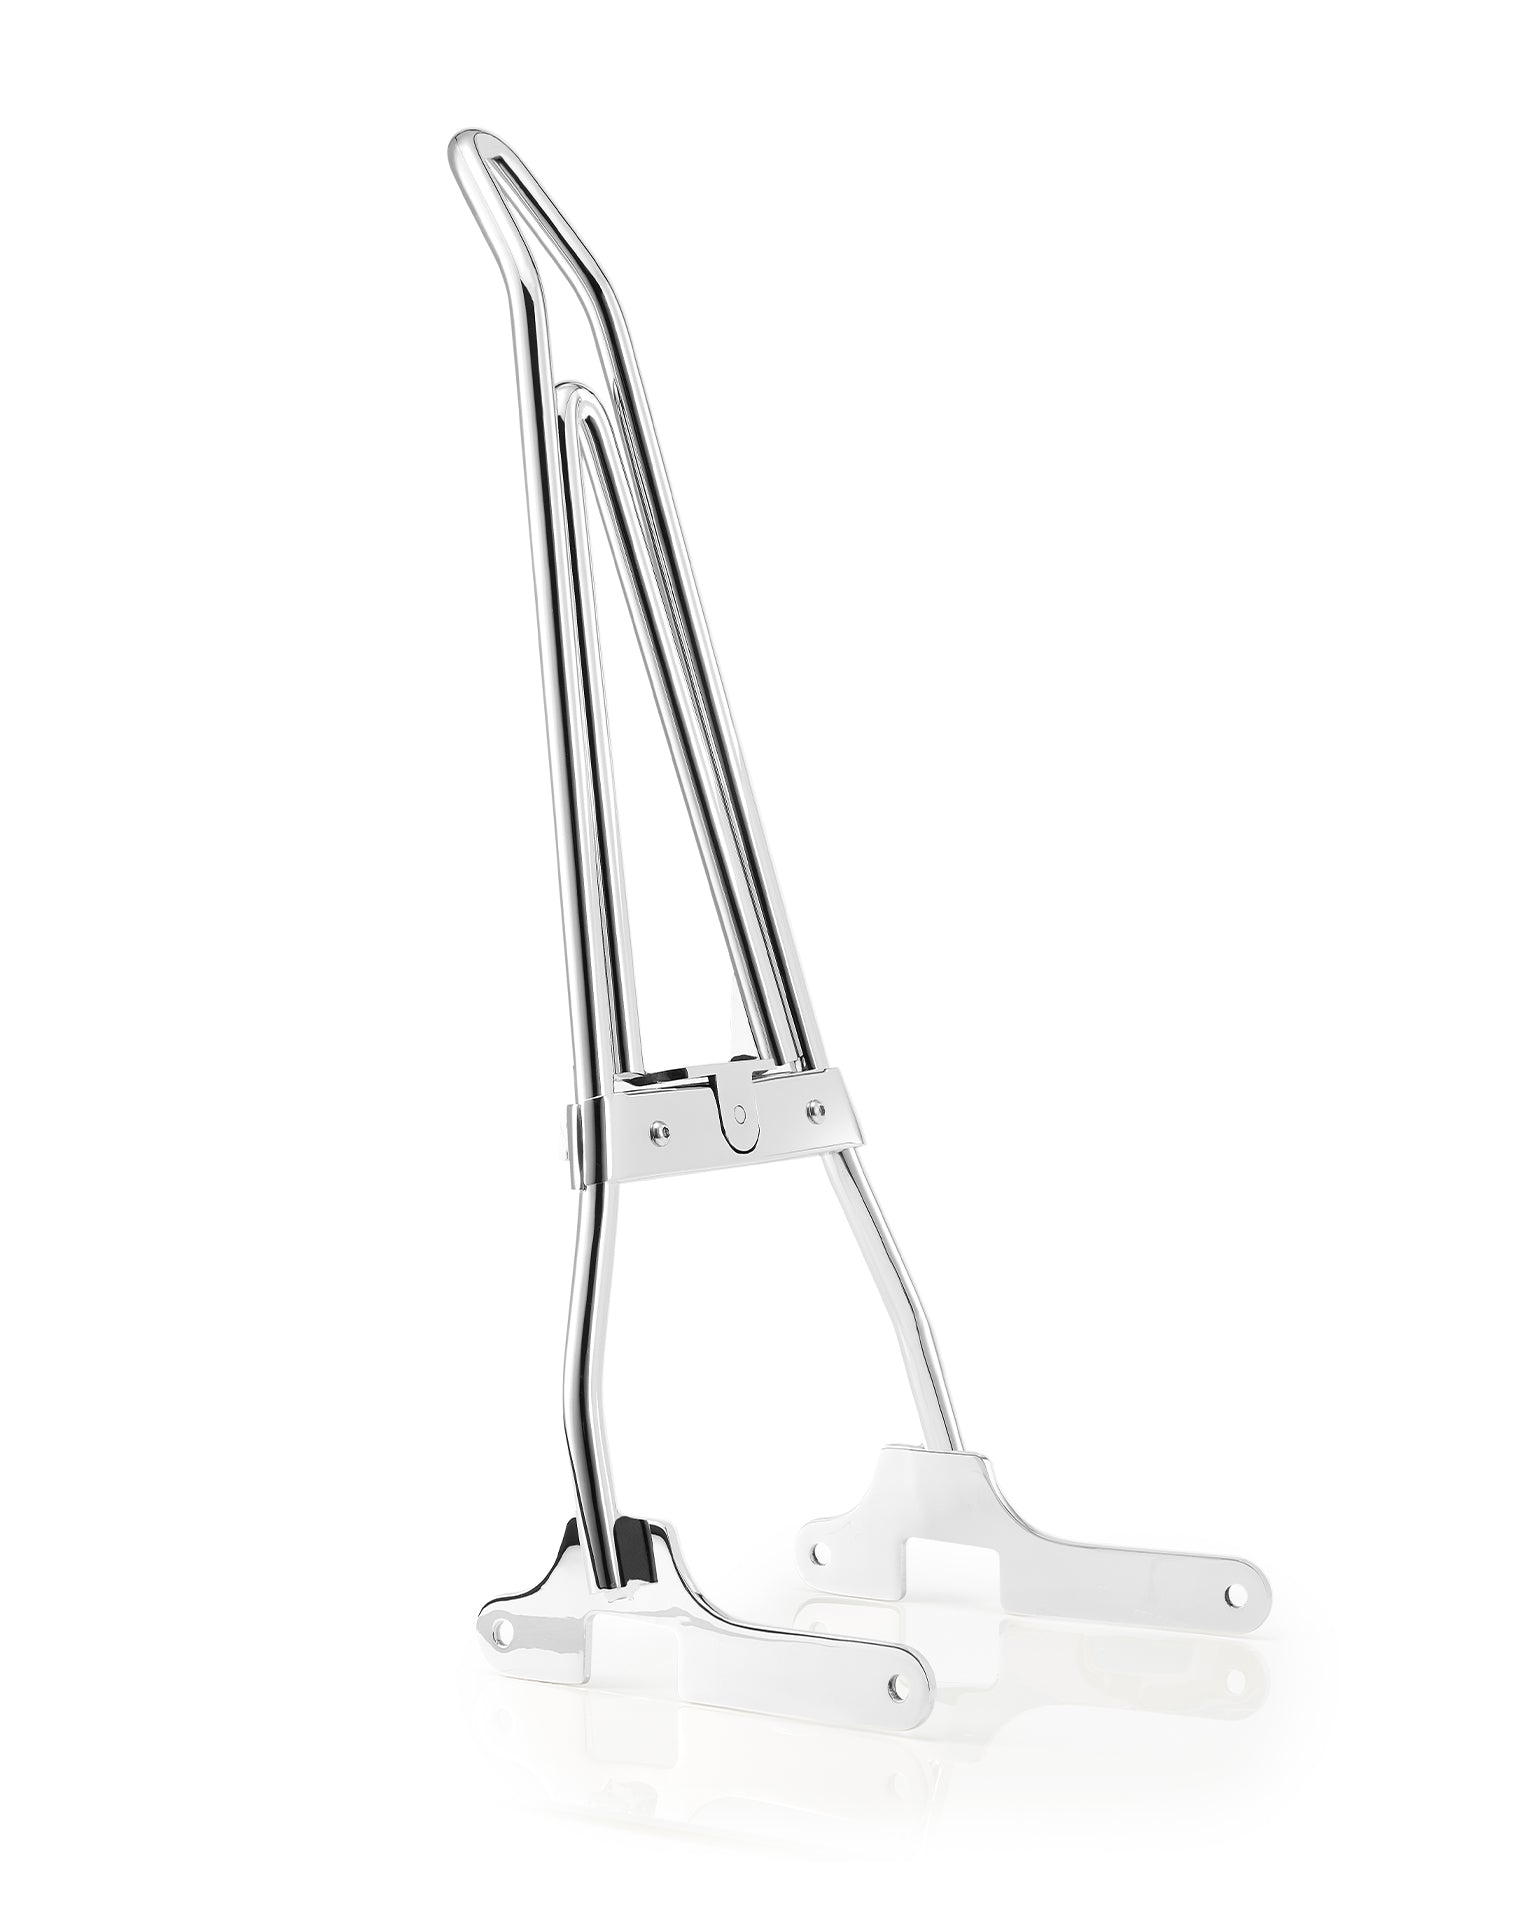 Iron Born Blade 25" Sissy Bar with Foldable Luggage Rack for Harley Sportster 1200 Custom XL1200C Chrome Main view